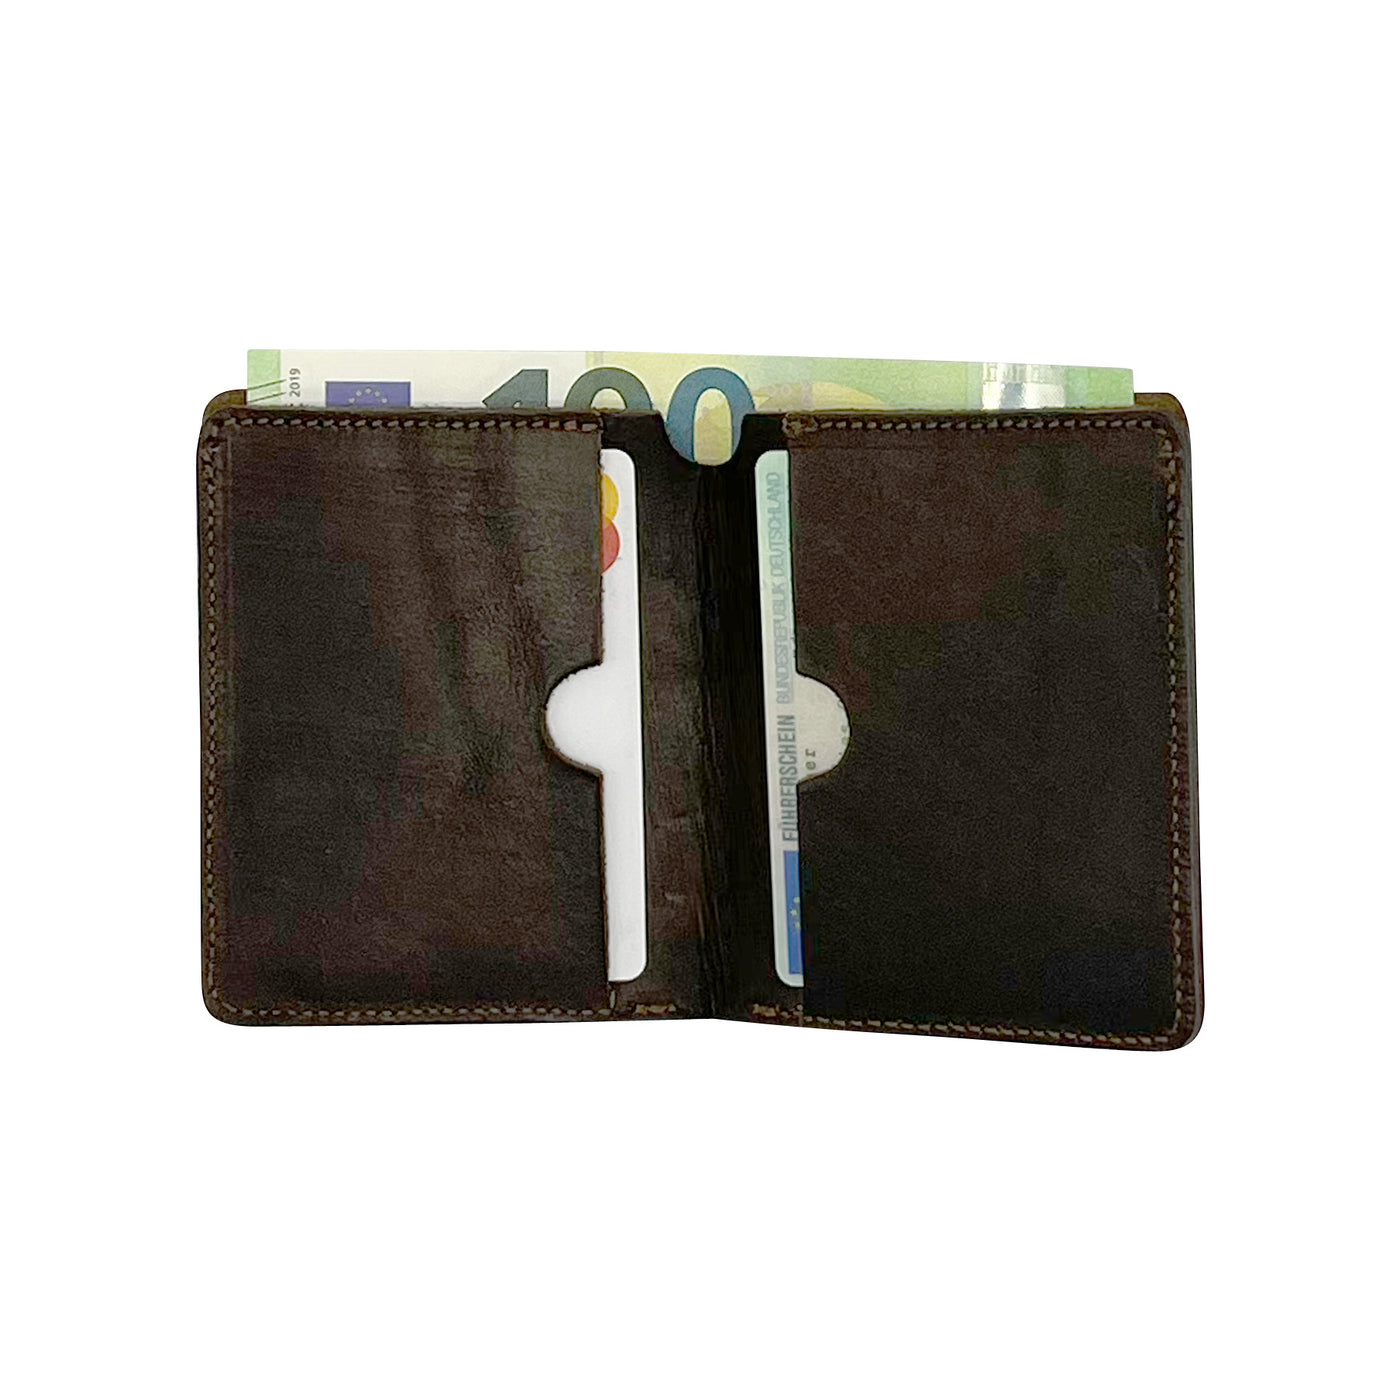 Thedi Leathers Portemonnaie Card Holder Brown